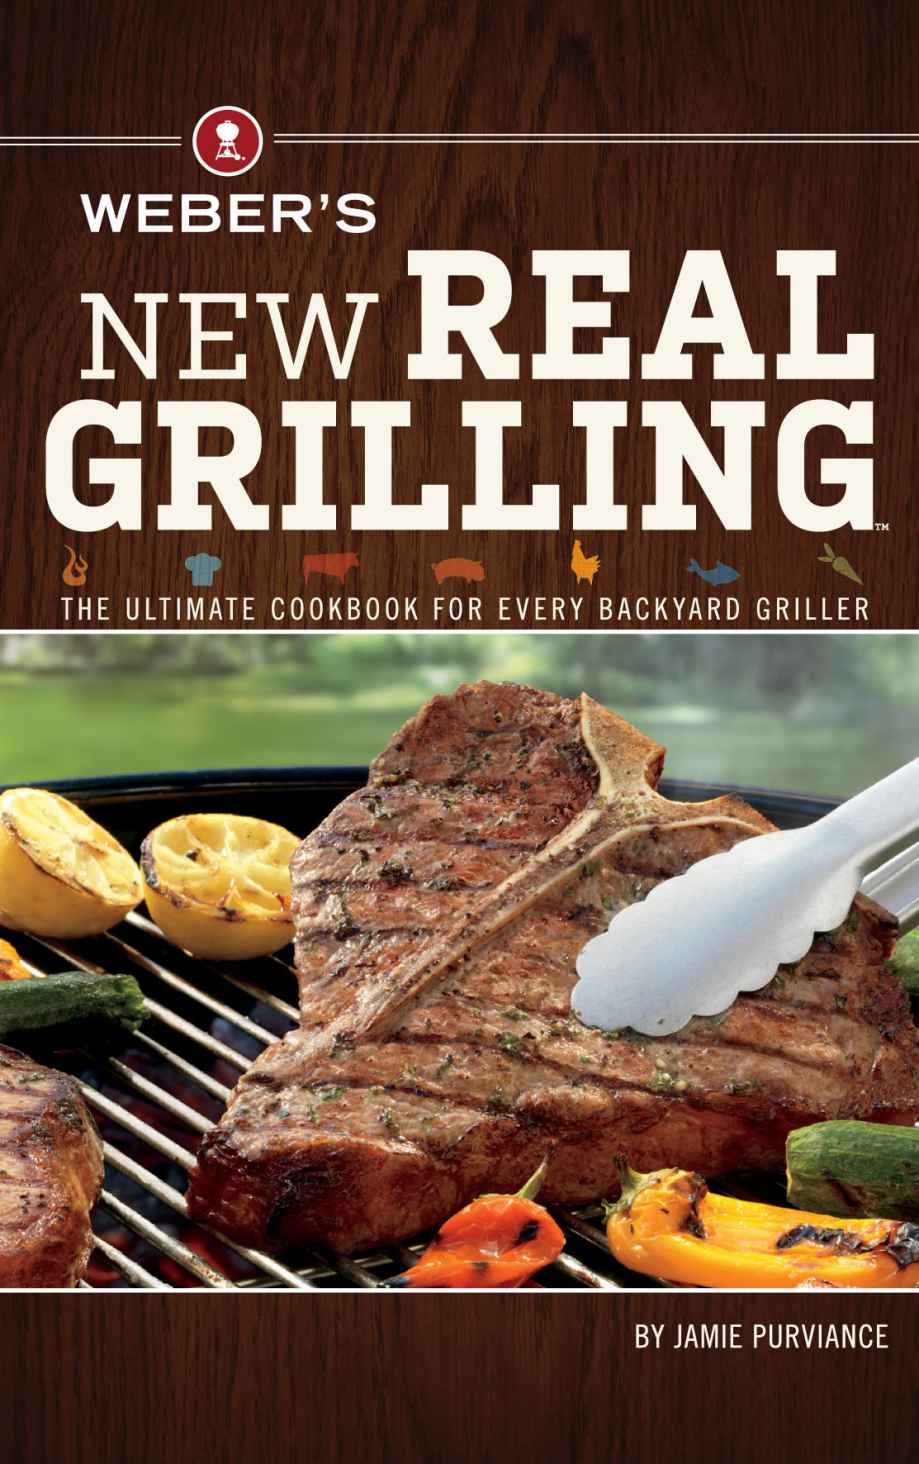 Webers New Real Grilling The ultimate cookbook for every backyard griller - image 1